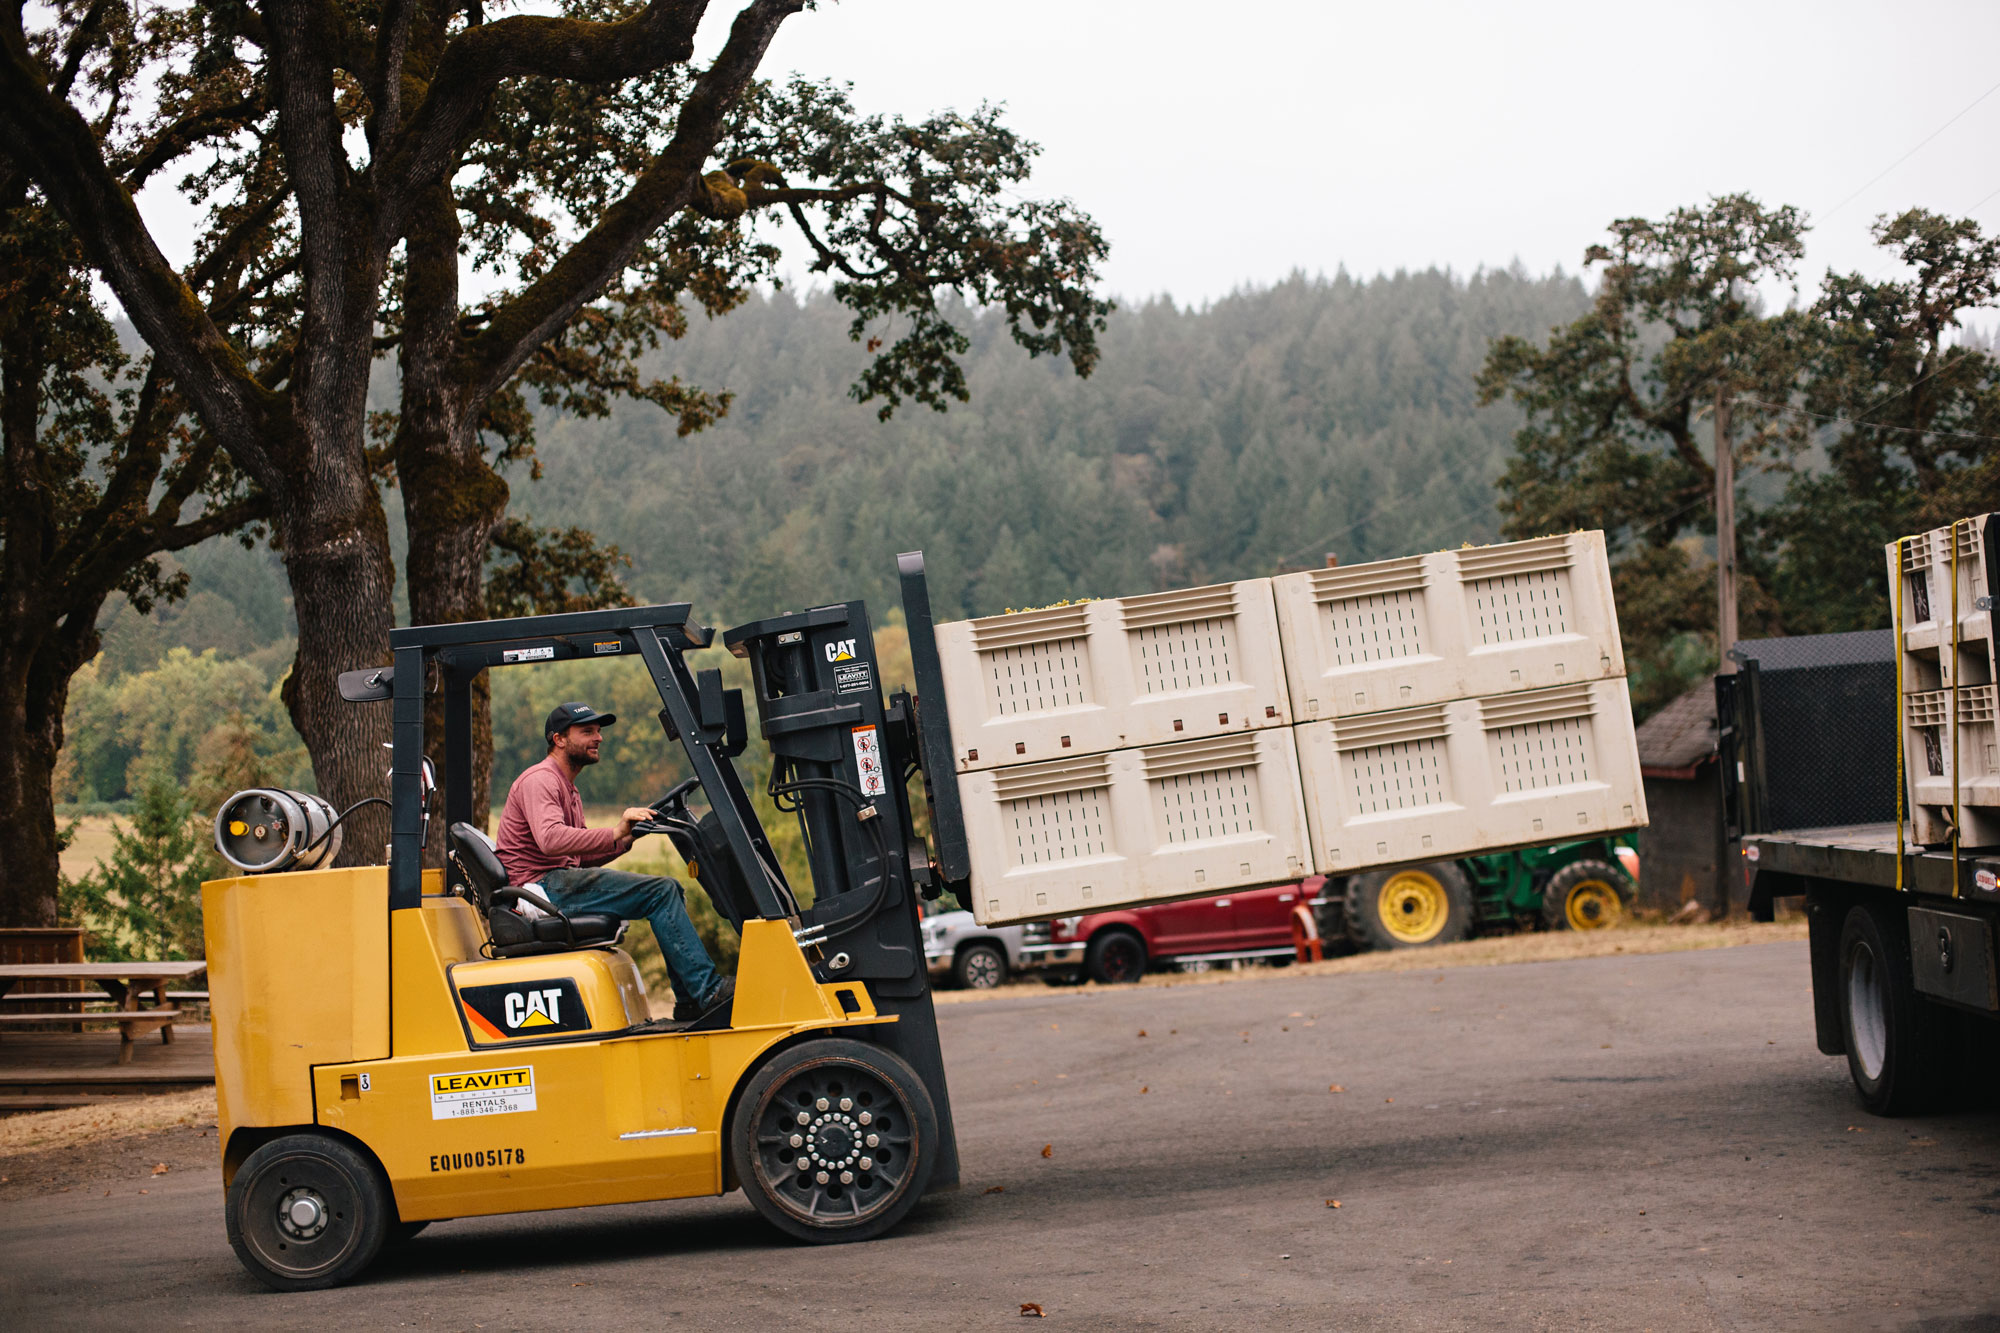 Using a fork lift to move containers of grapes from harvest